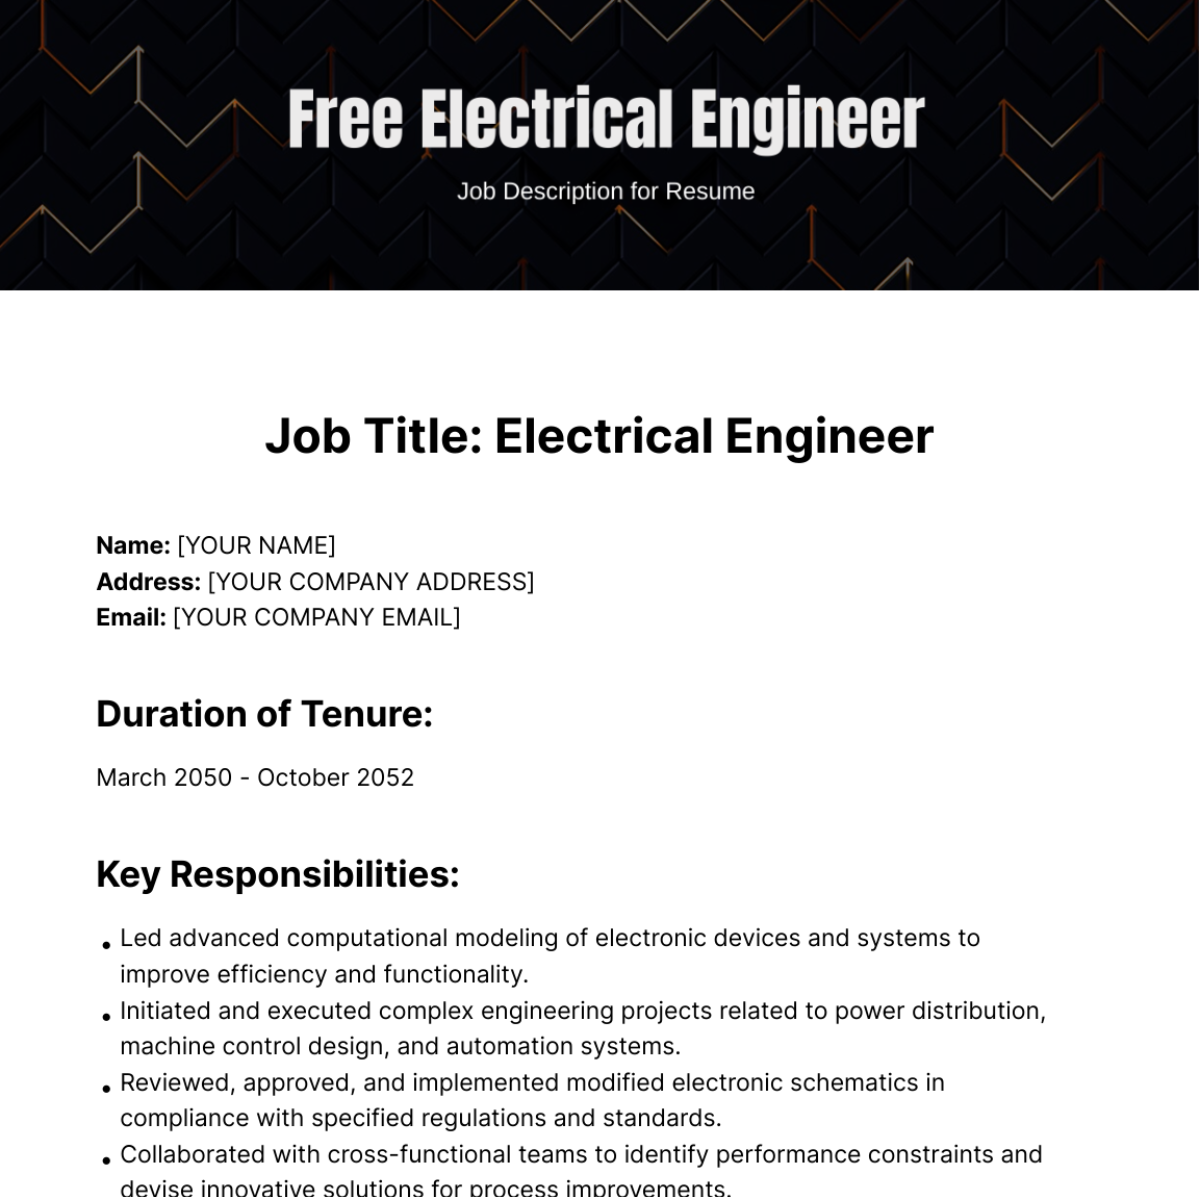 Free Electrical Engineer Job Description for Resume Template